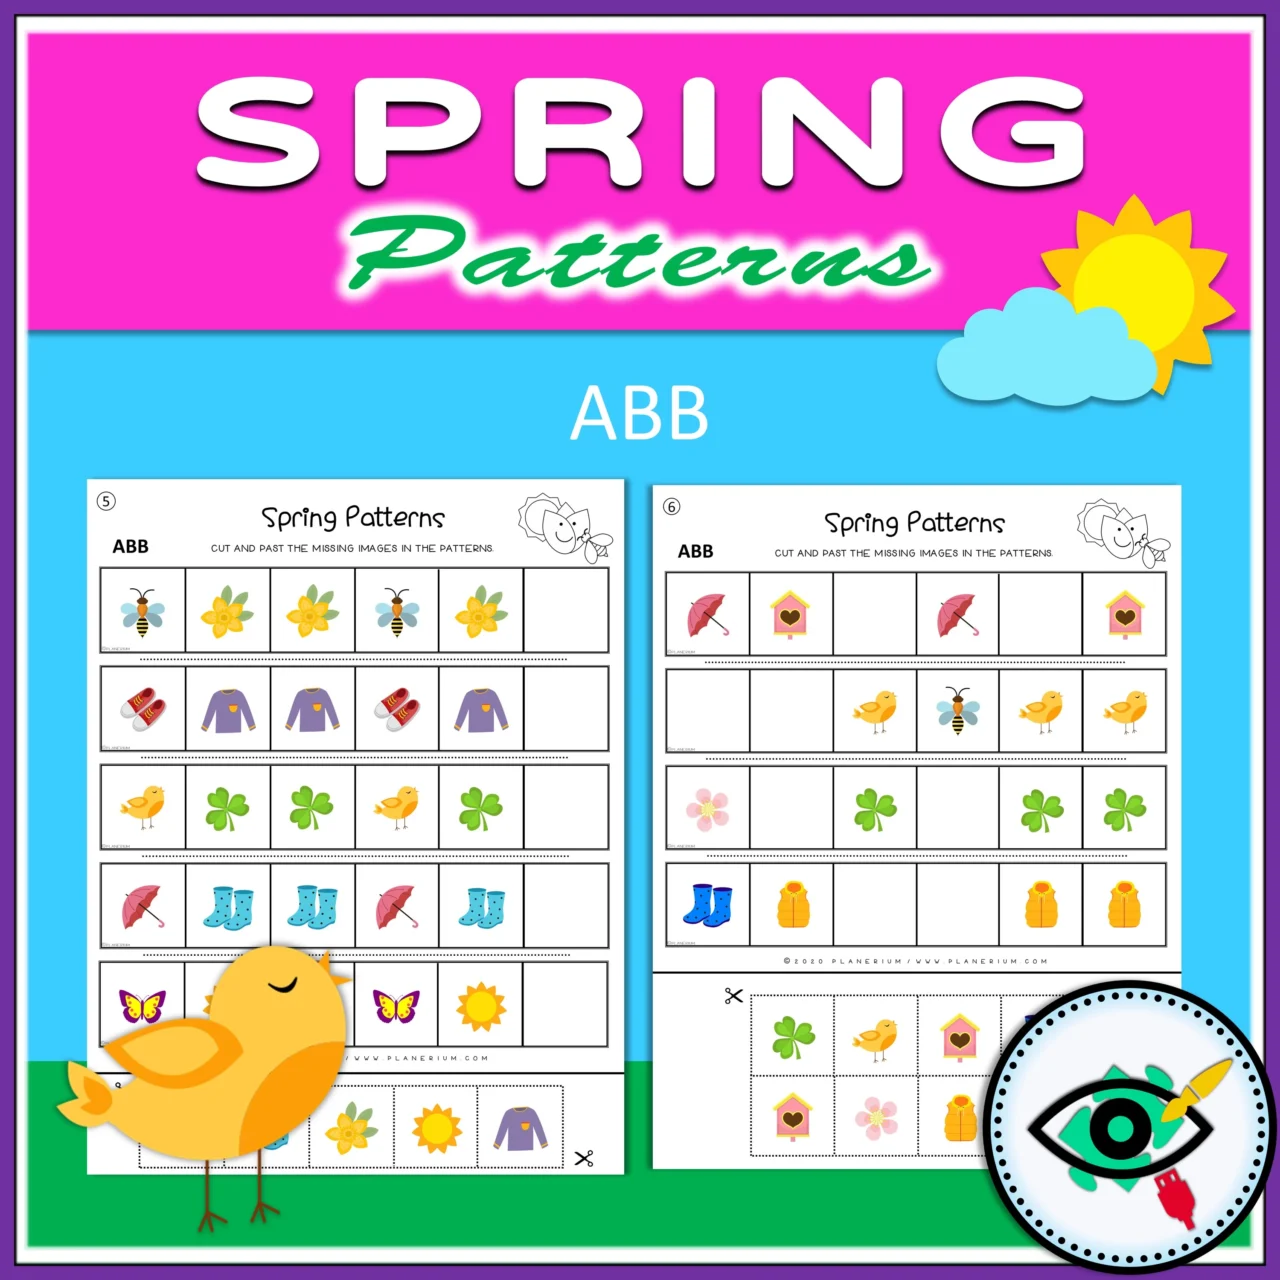 Spring - Patterns Activity - Image Title 4